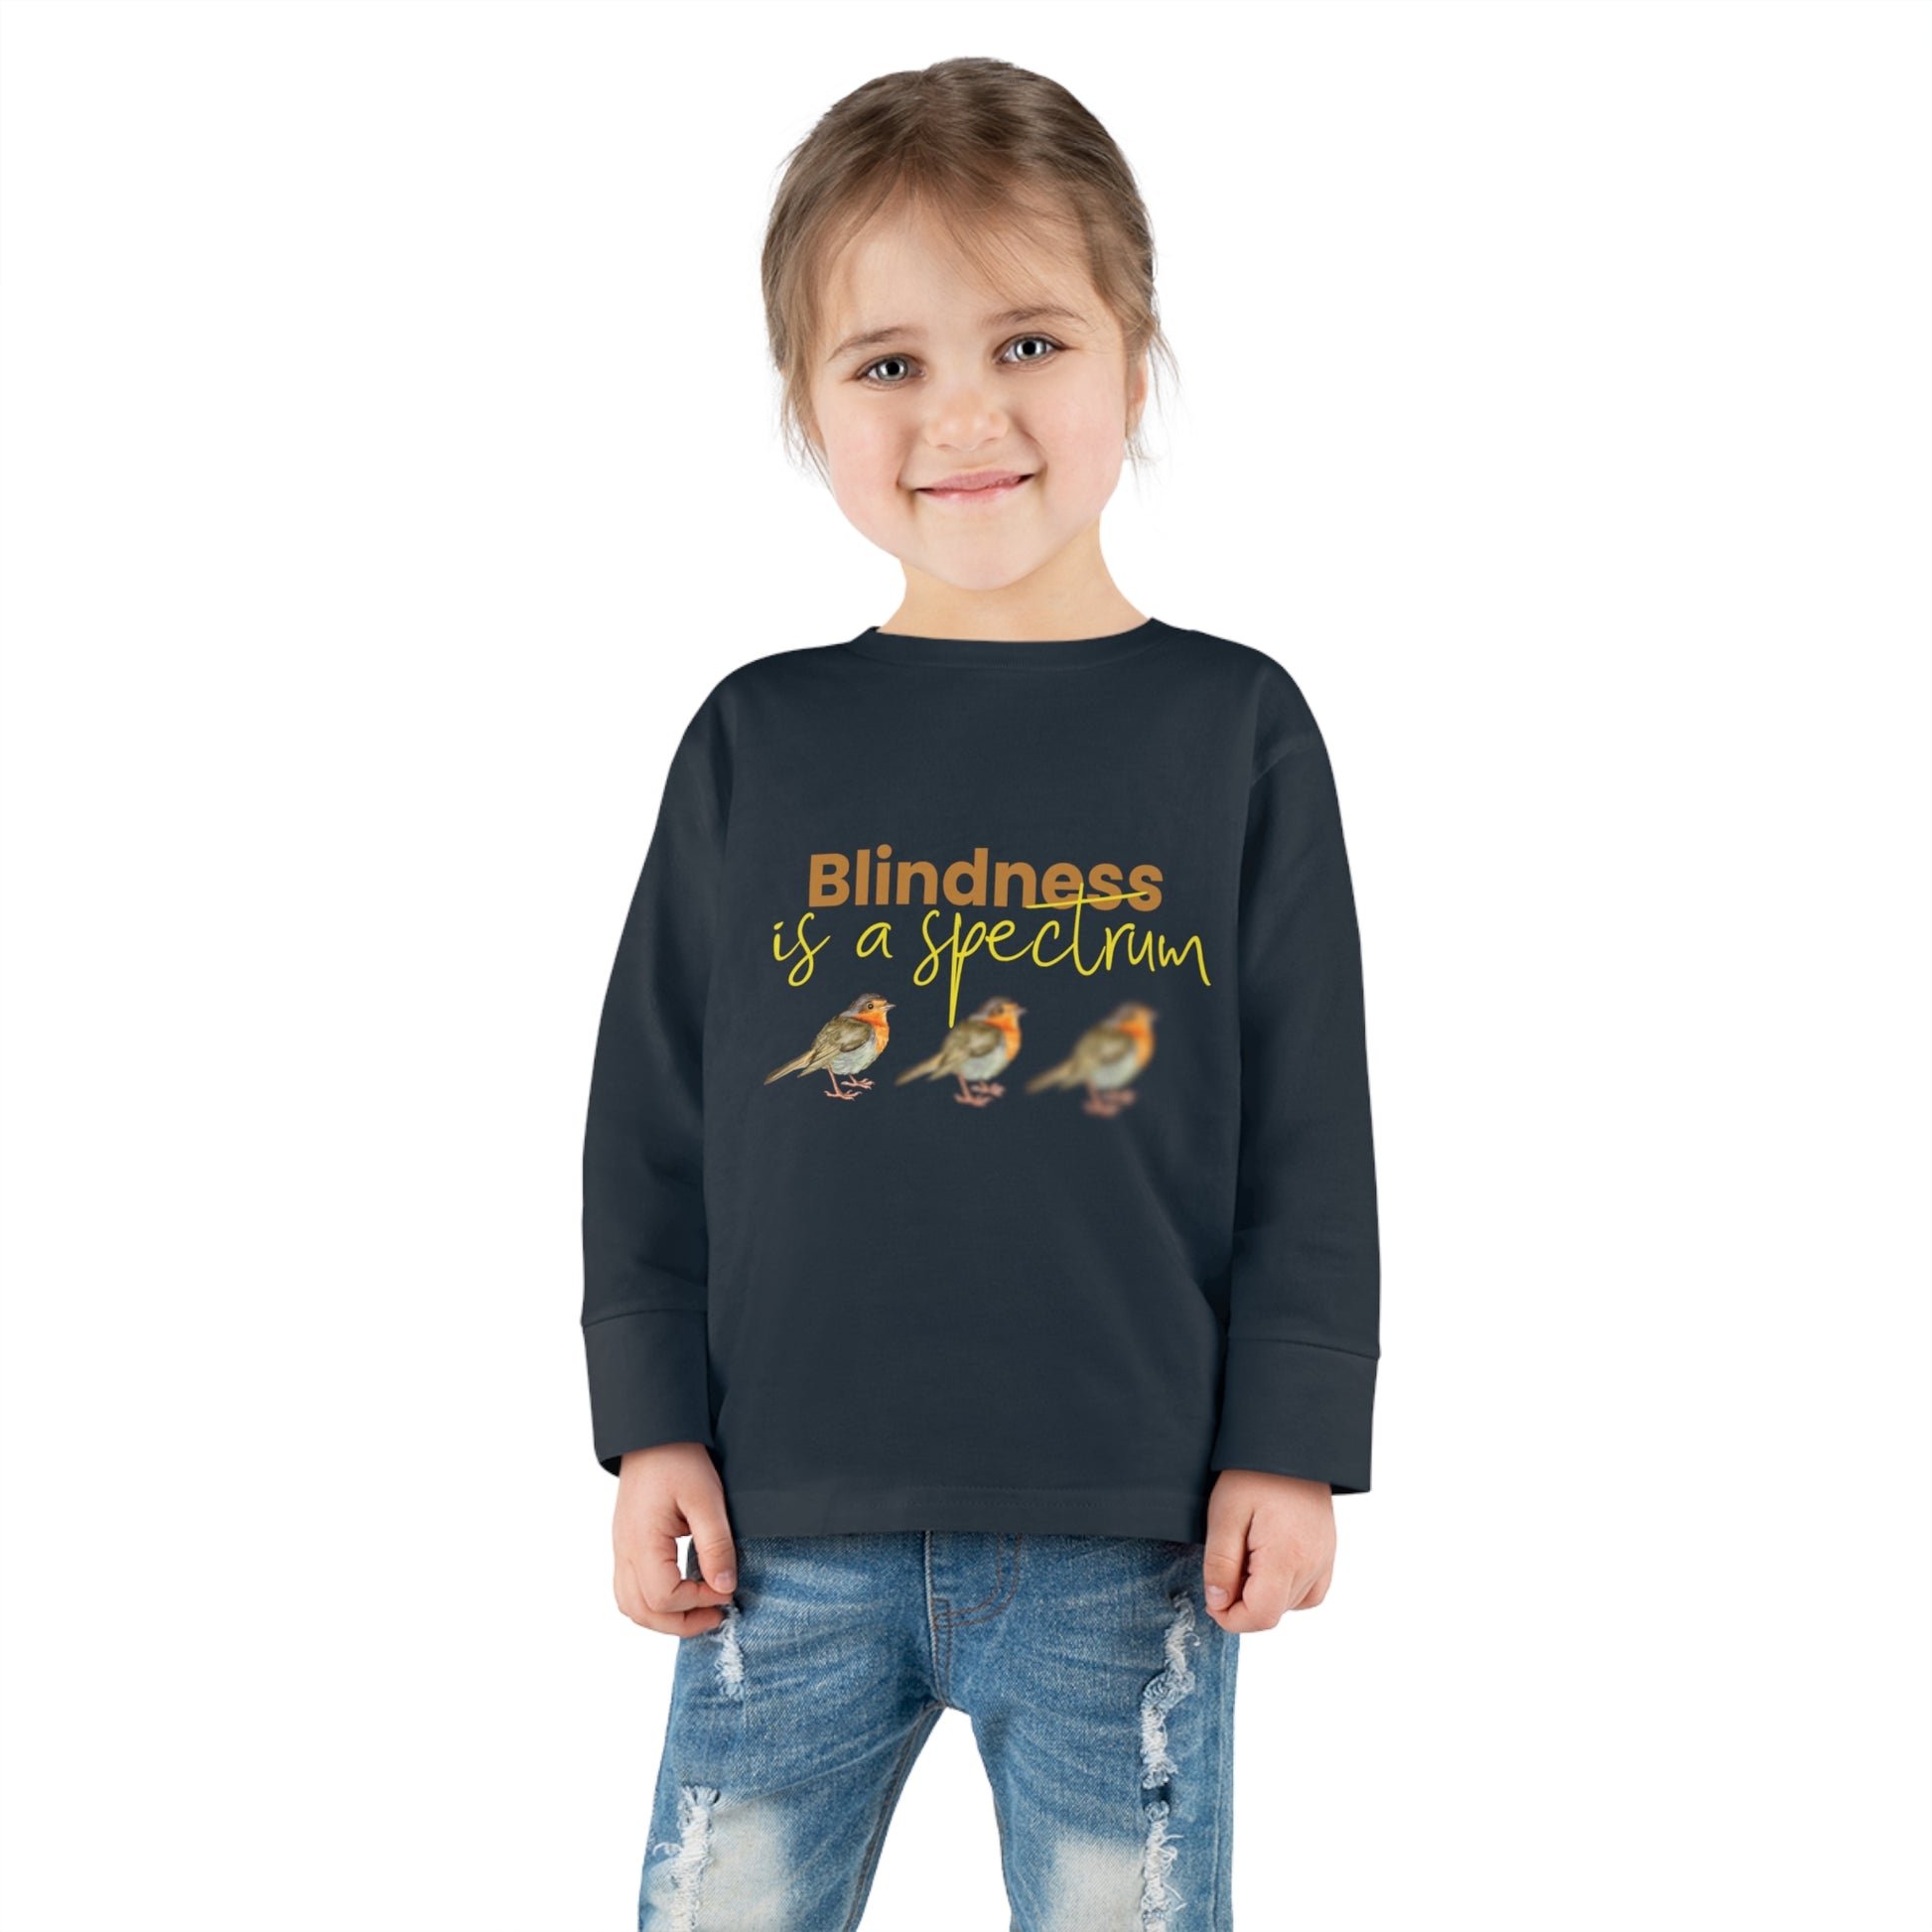 Blindness is a spectrum -Toddler Long Sleeve Tee